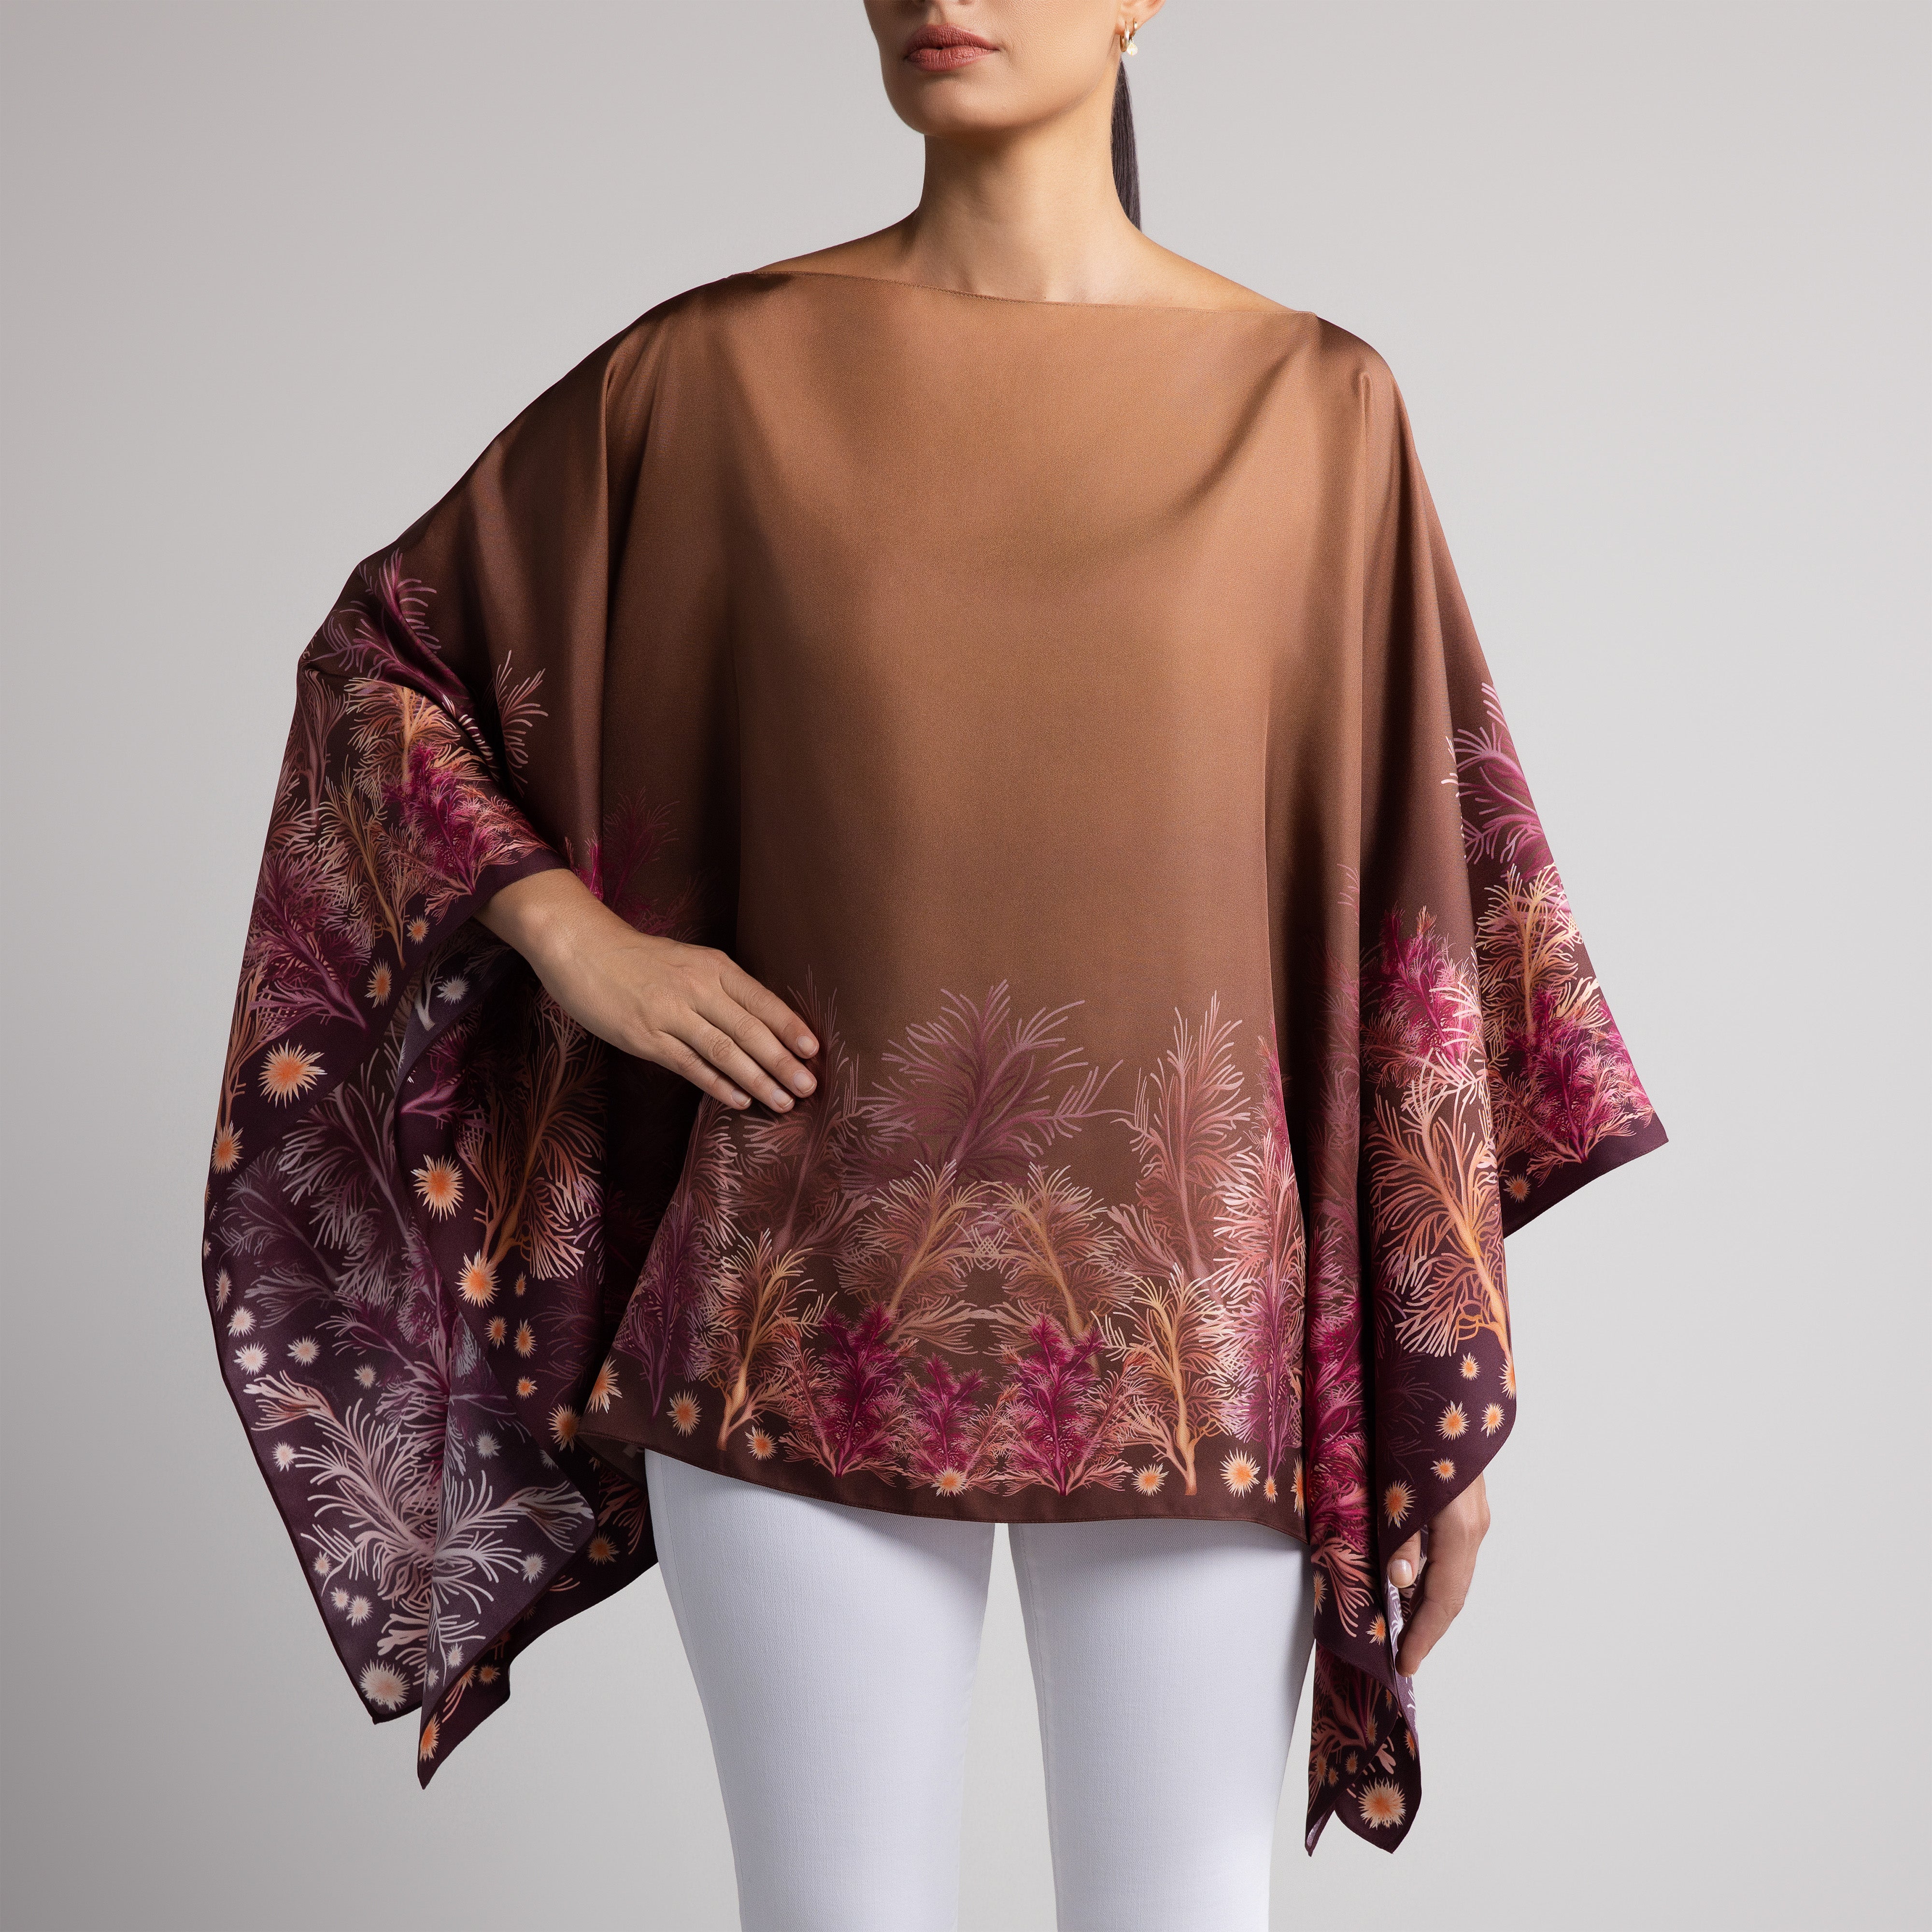 Galapagos Silk Poncho in Brown Ombré